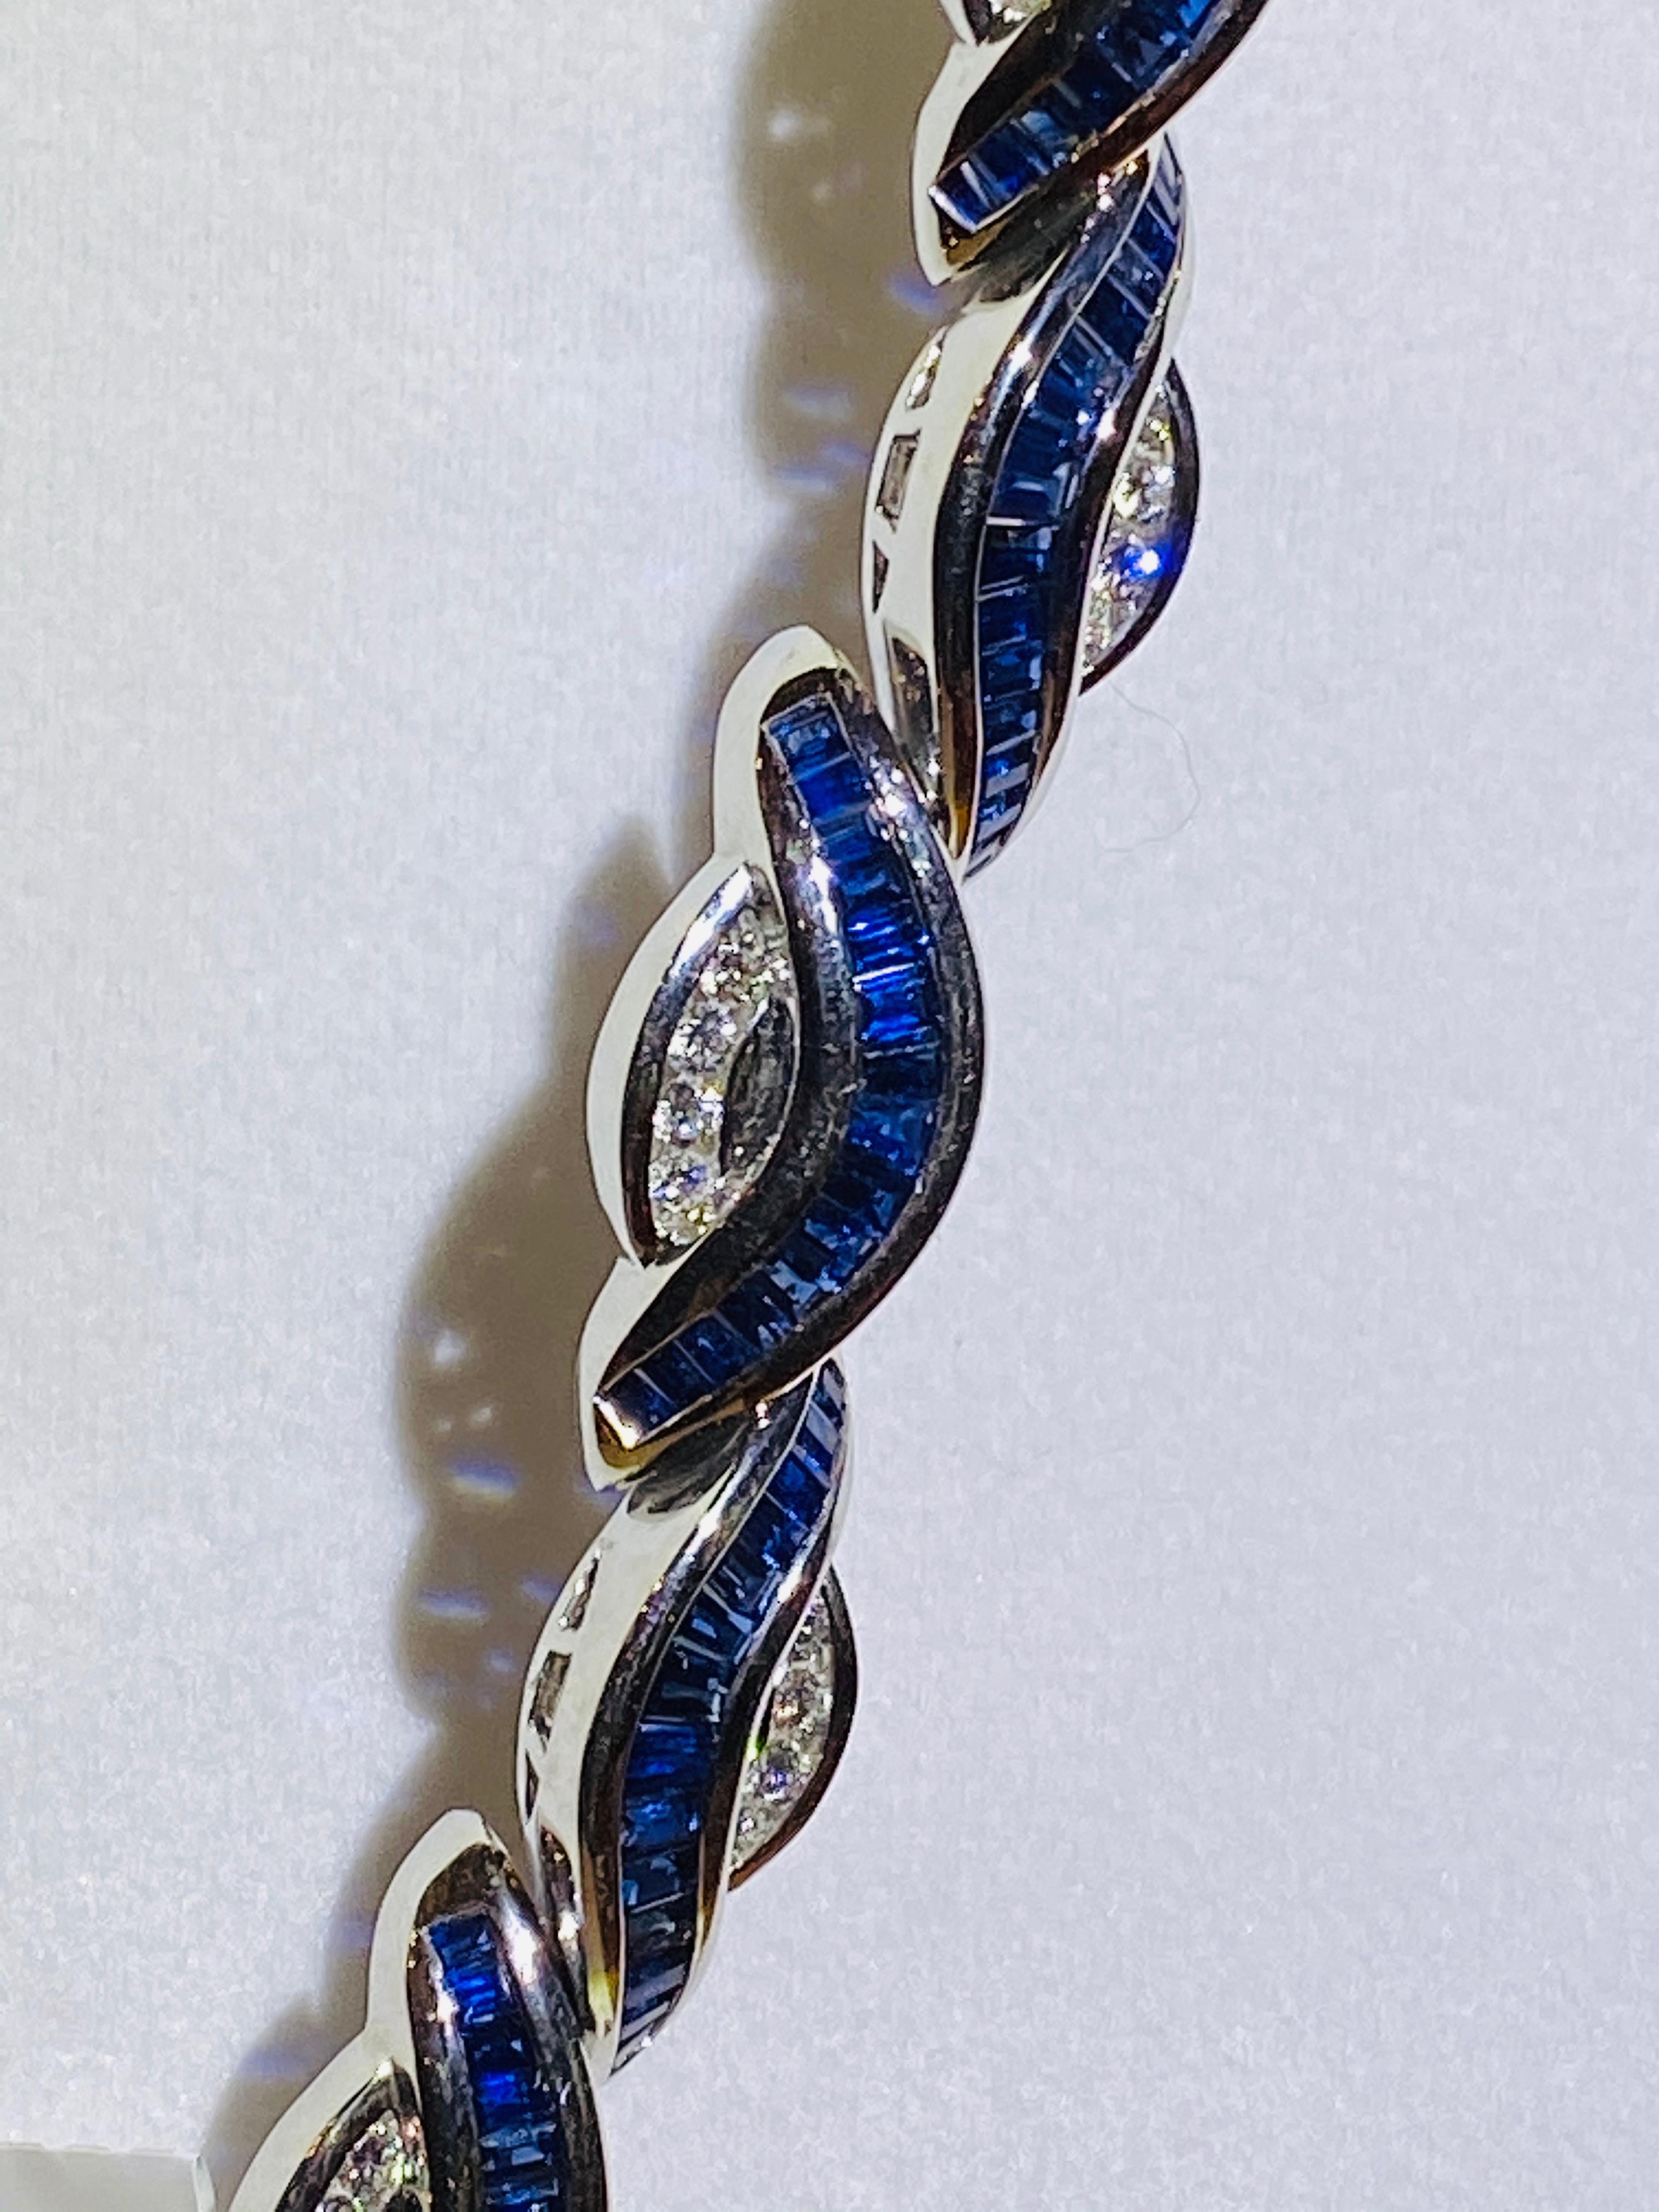 Platinum sapphire and diamond bracelet containing 148 baguette sapphires weighing combined 10.09 carats and 40 round brilliant cut diamond weighing combined 1.44 carats. 